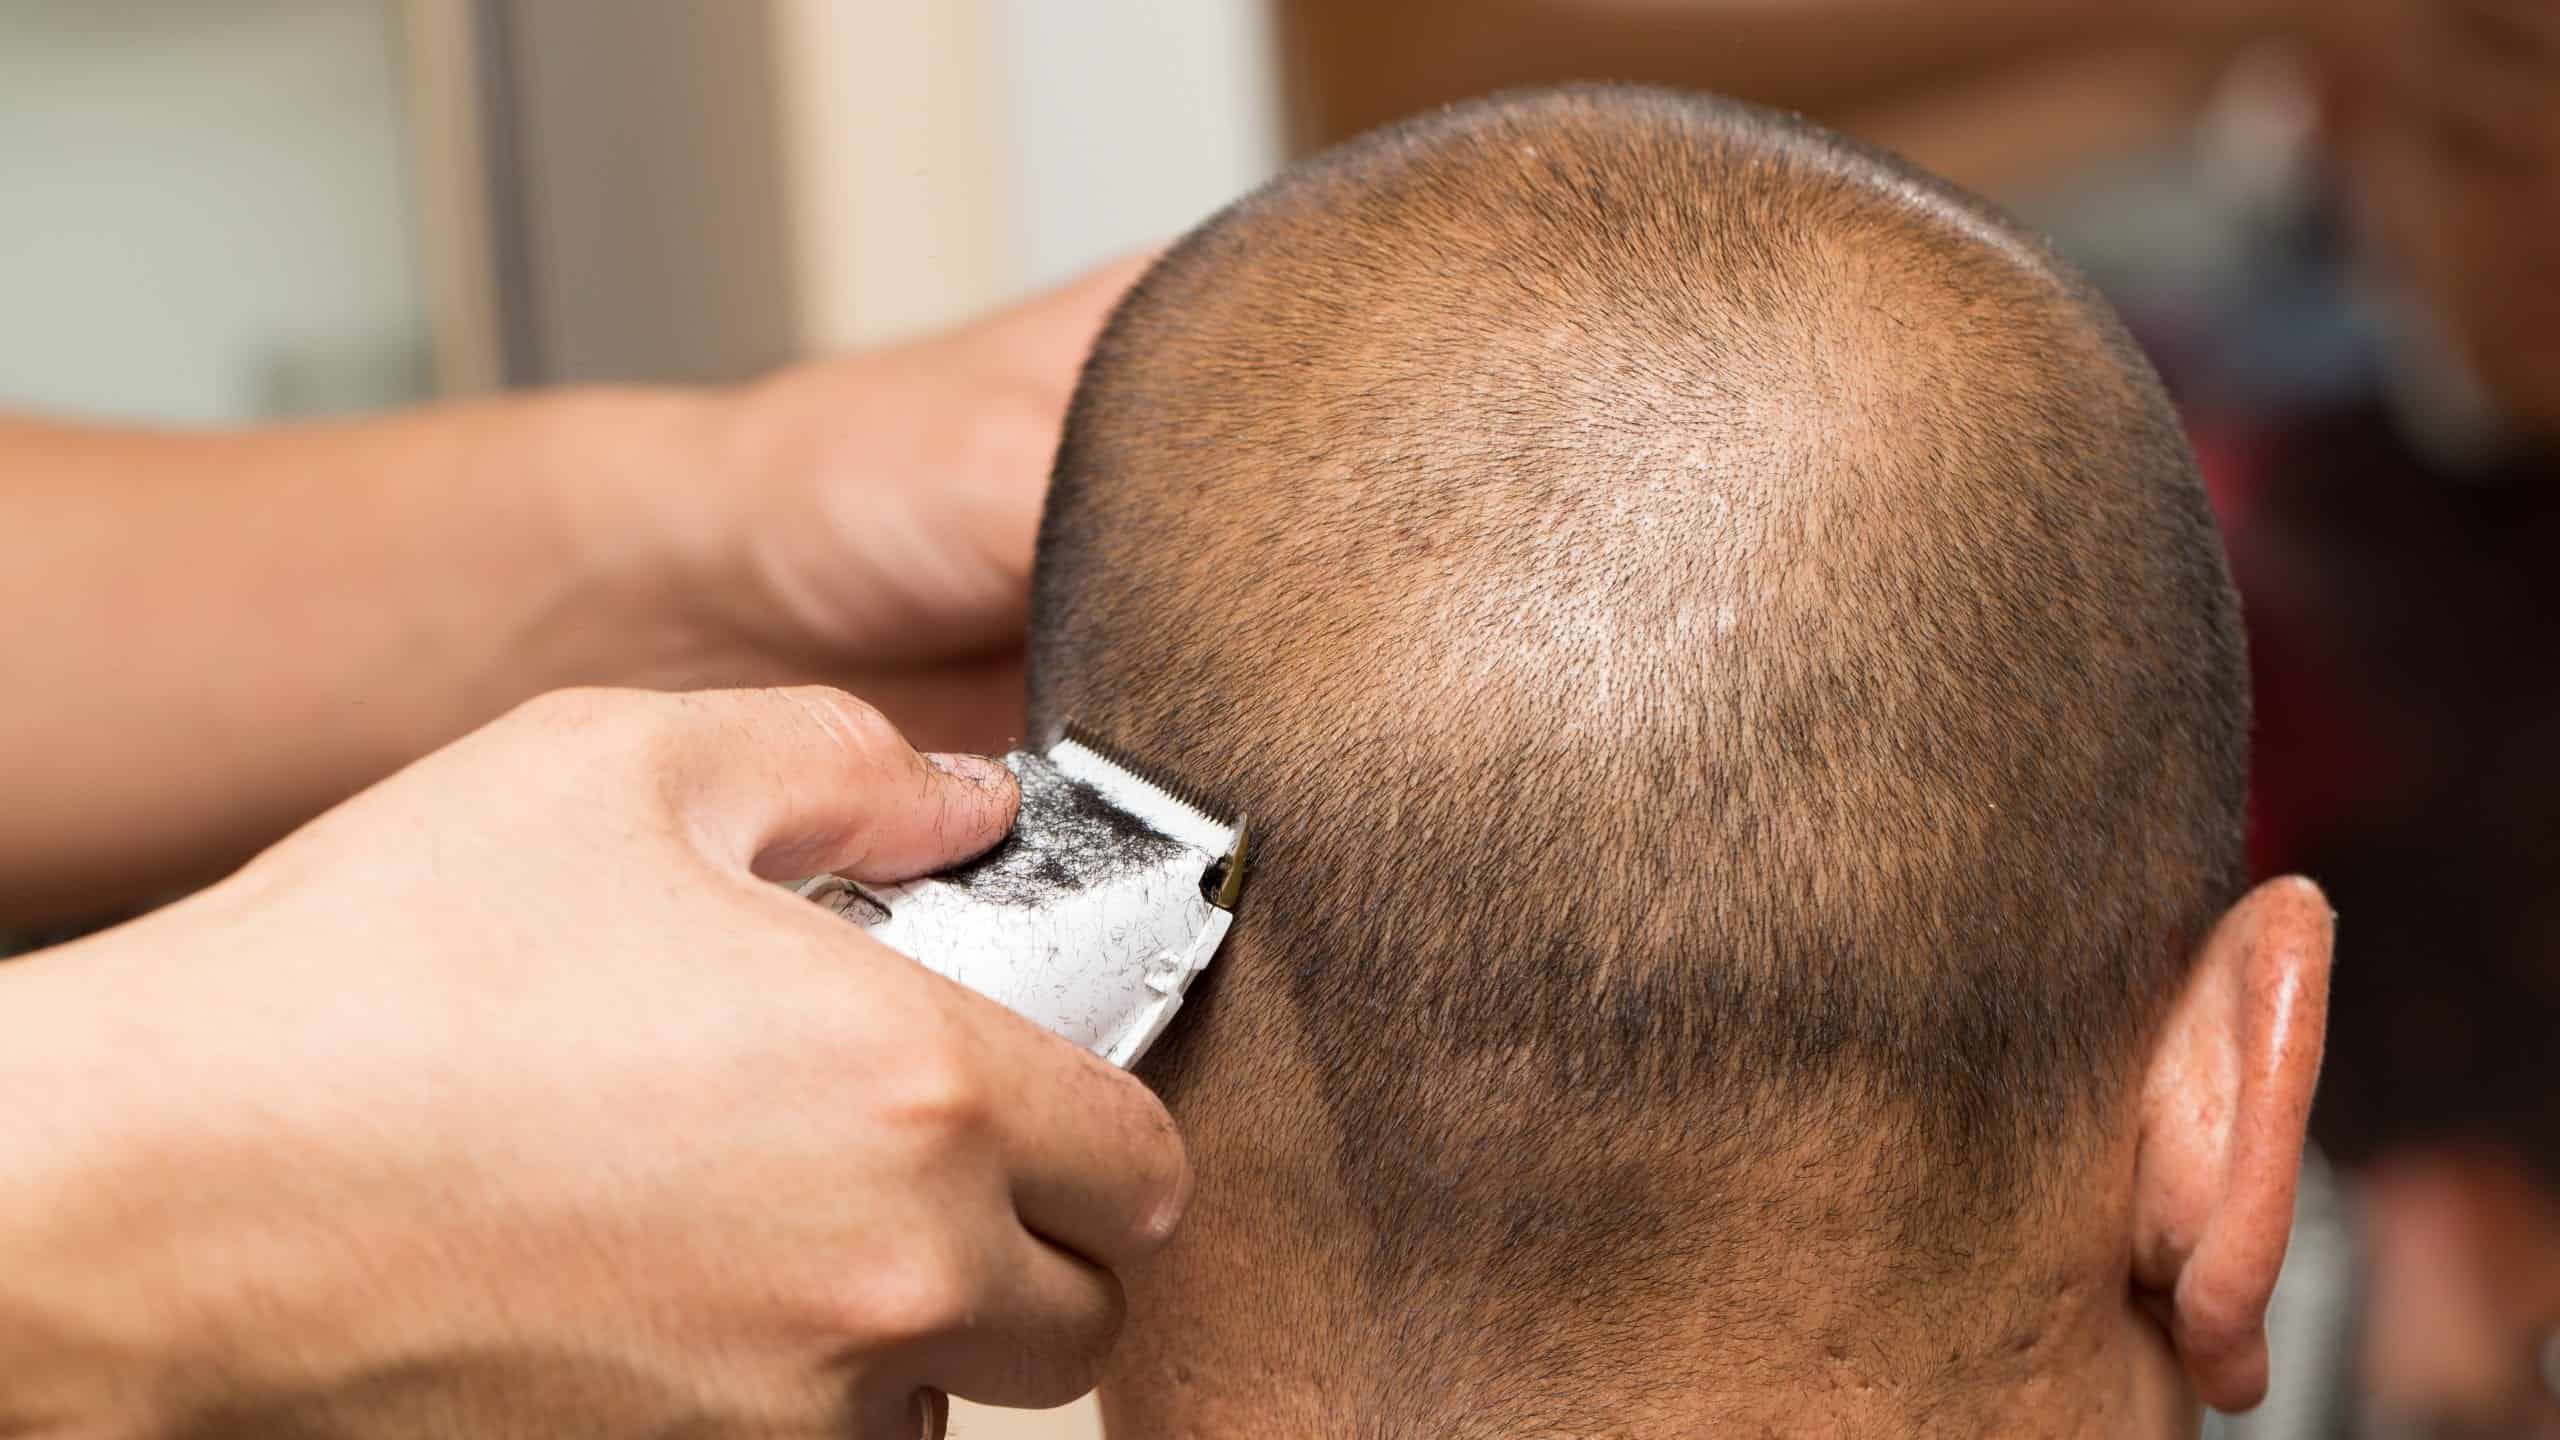 Video Those Bumps On Your Head May Be More Serious Than You Think